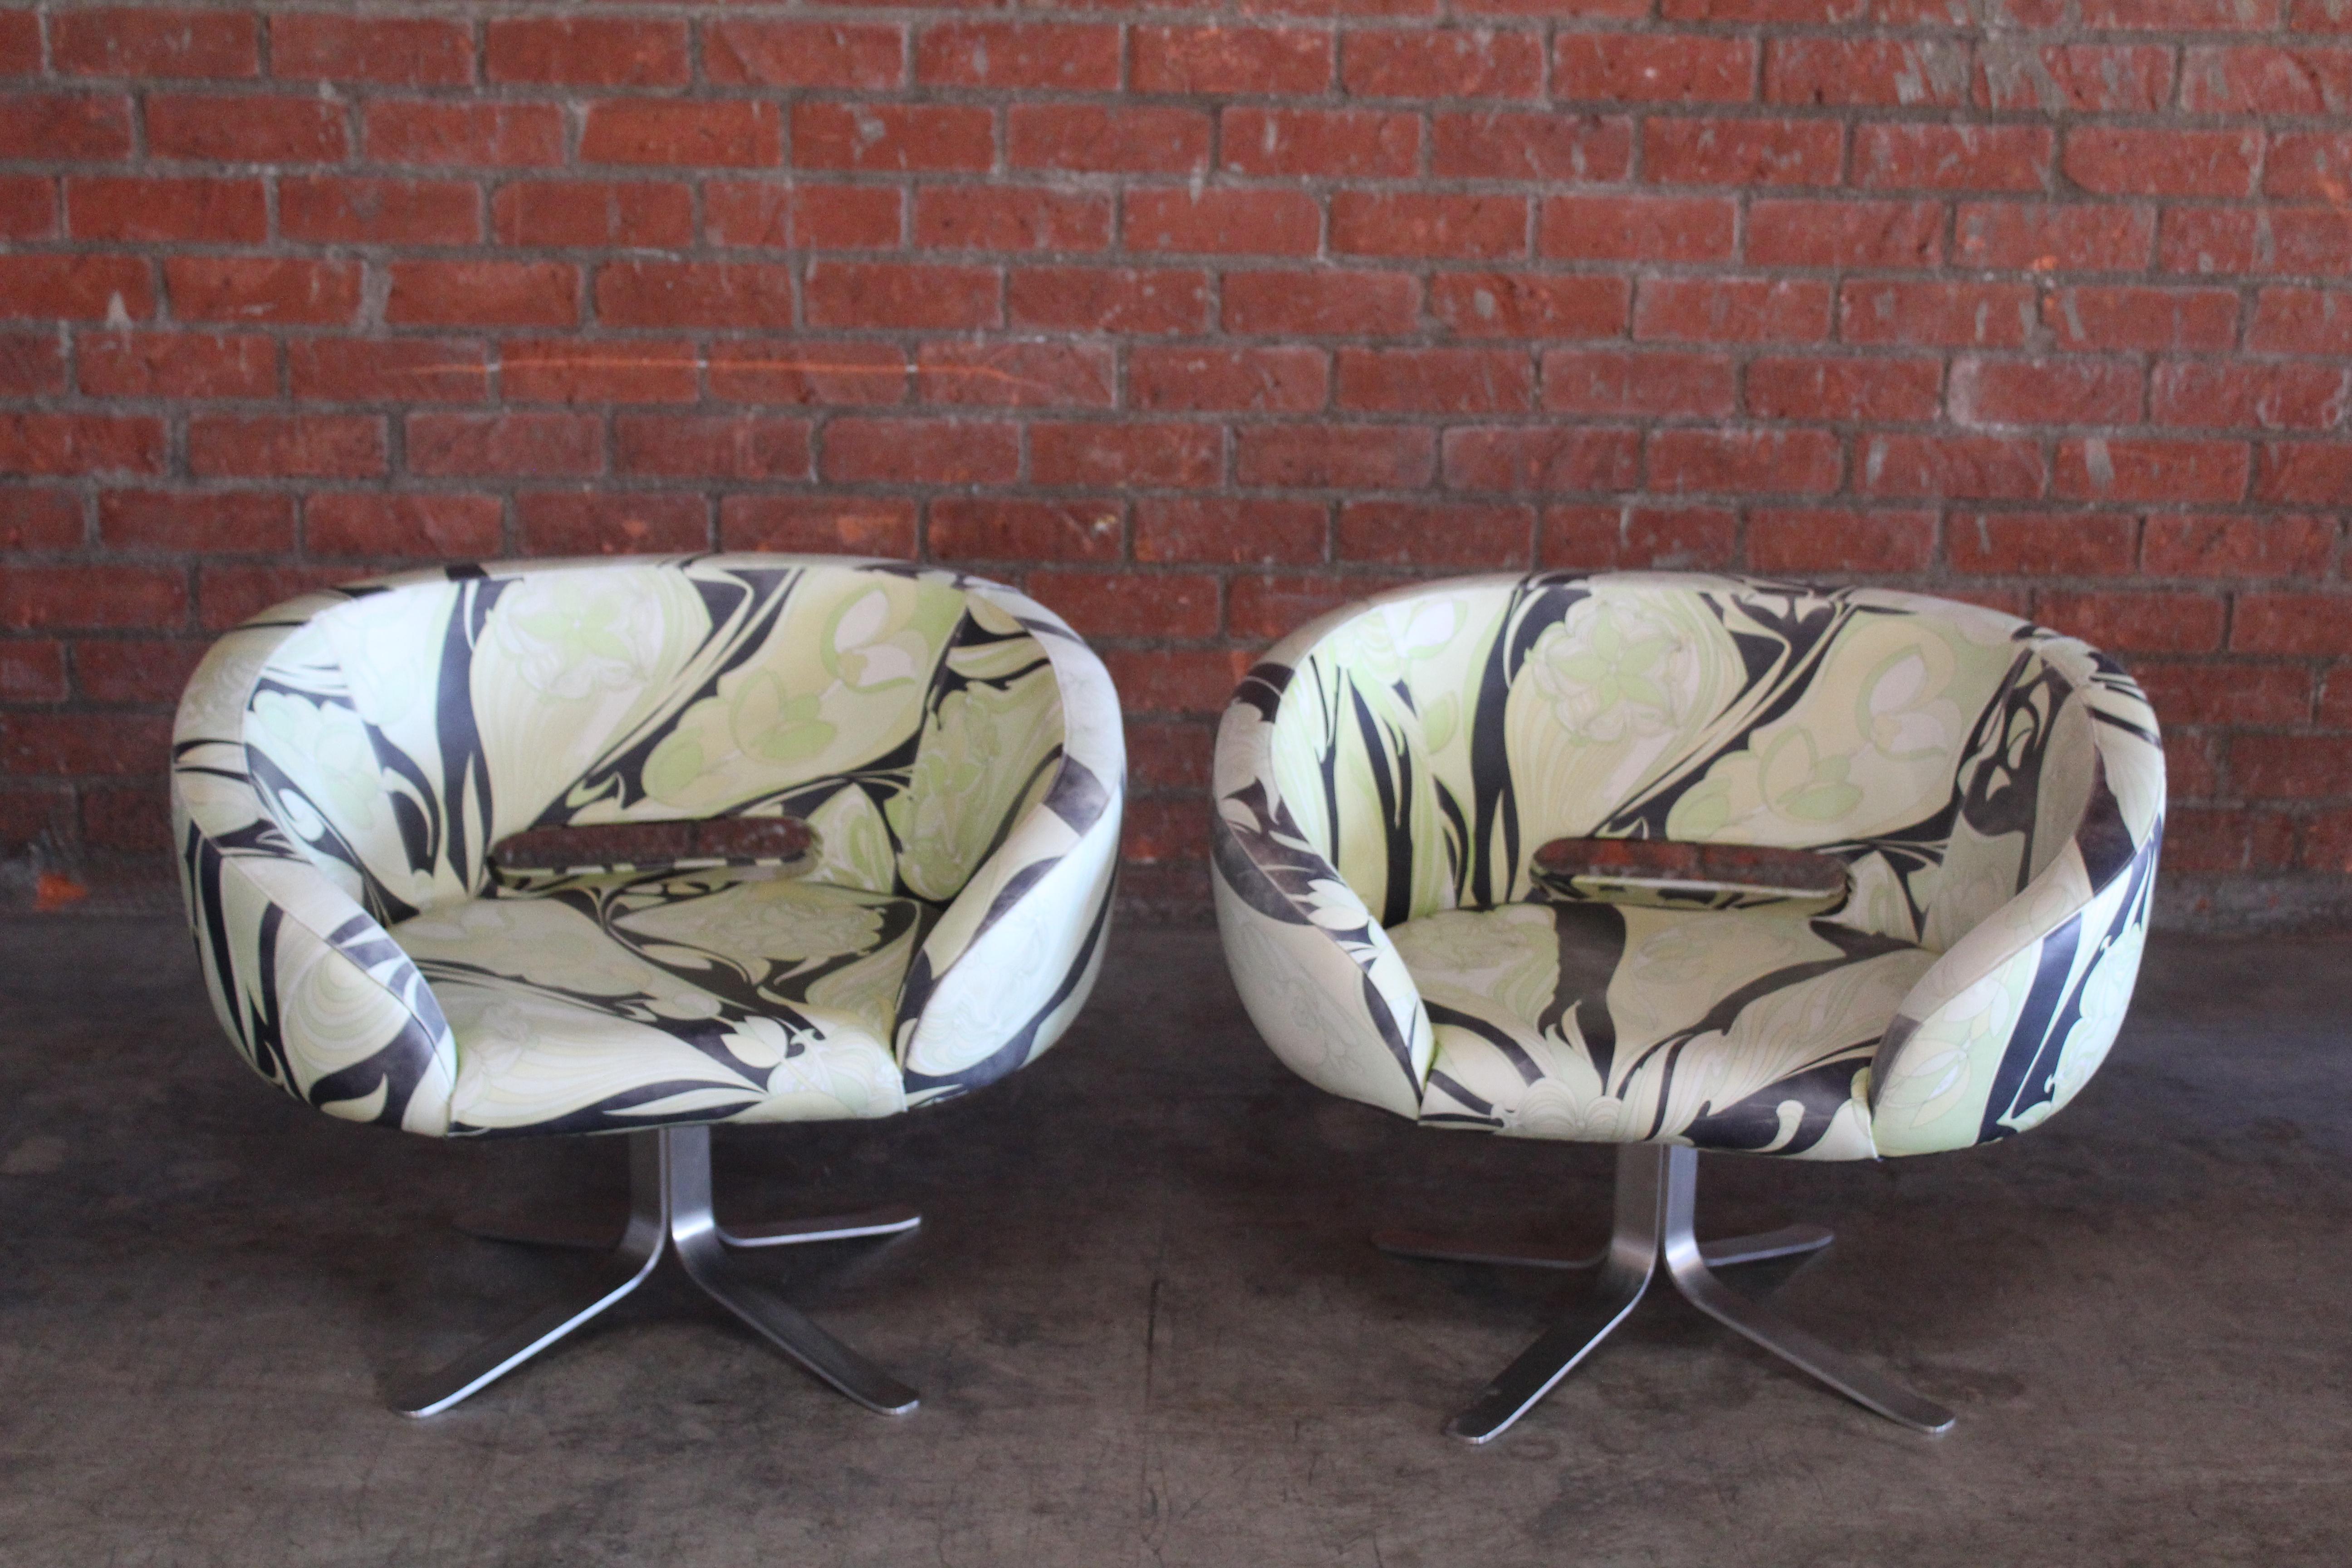 Rare pair of Rive Droit swivel chairs in Emilio Pucci leather by Cappellini, Italy, 2001.
The pair are in good condition with age appropriate wear to the Emilio Pucci printed leather. There is some fading to the leather. Sold as a pair.